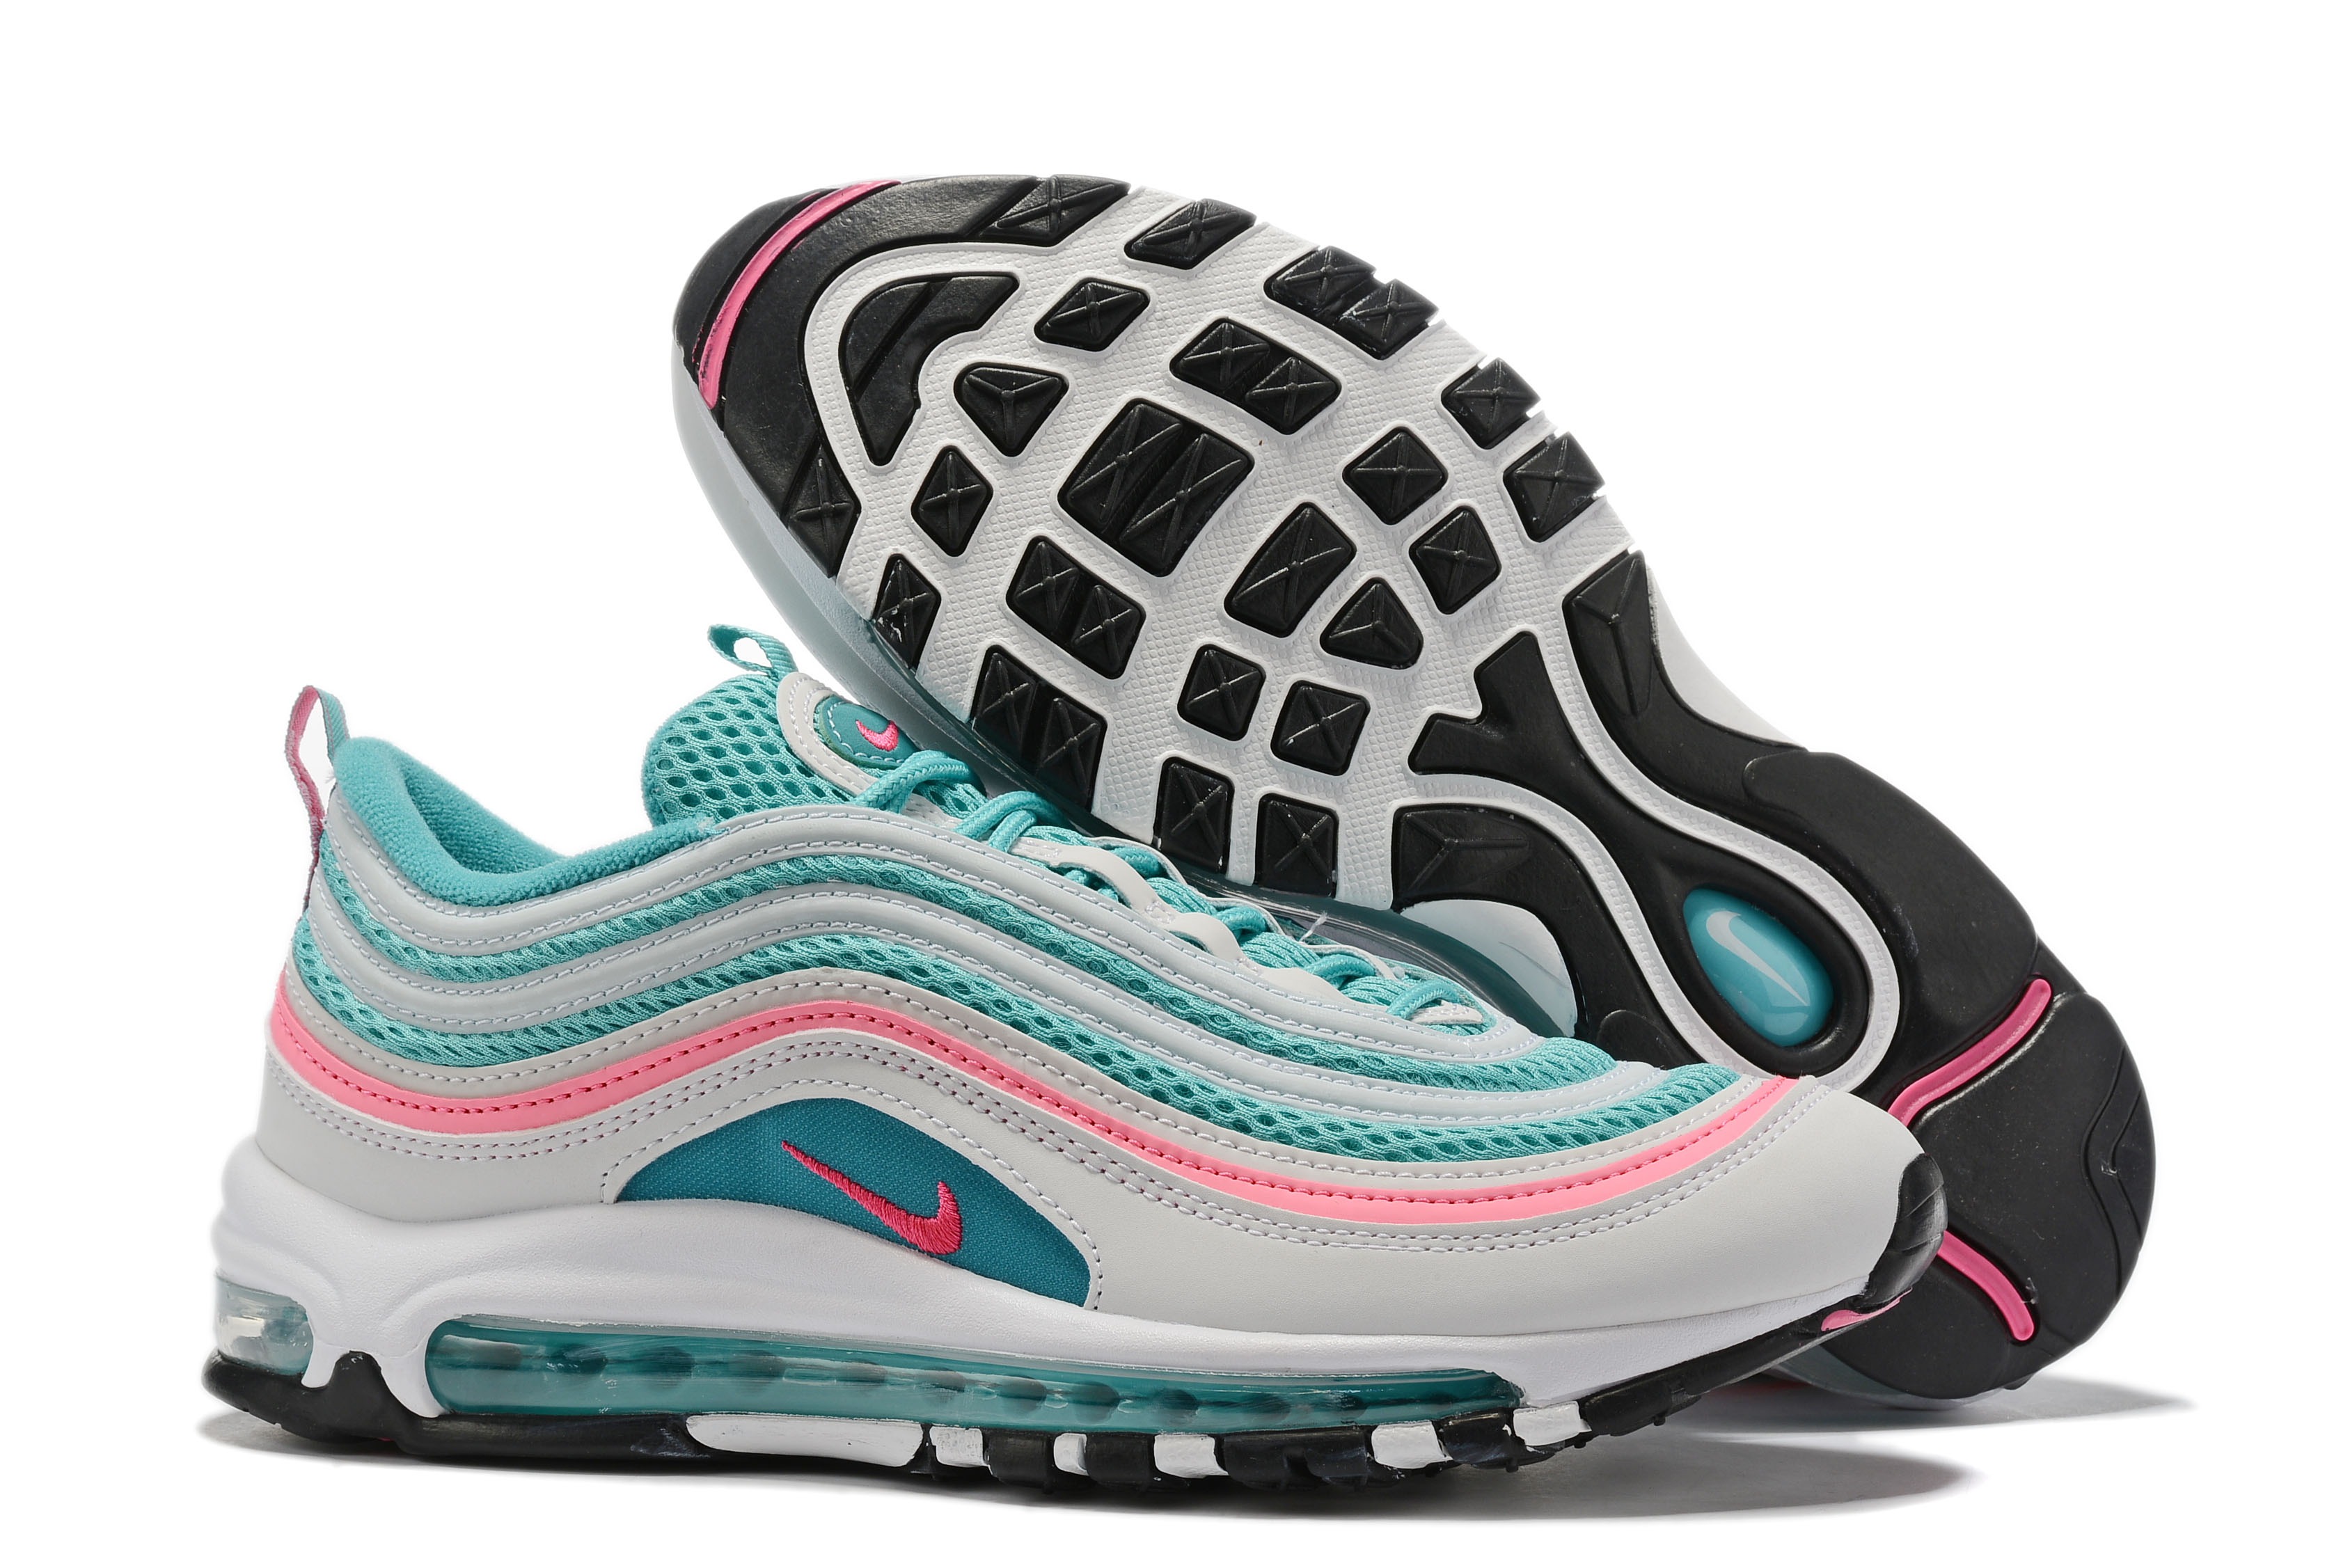 Men's Running weapon Air Max 97 Shoes 015